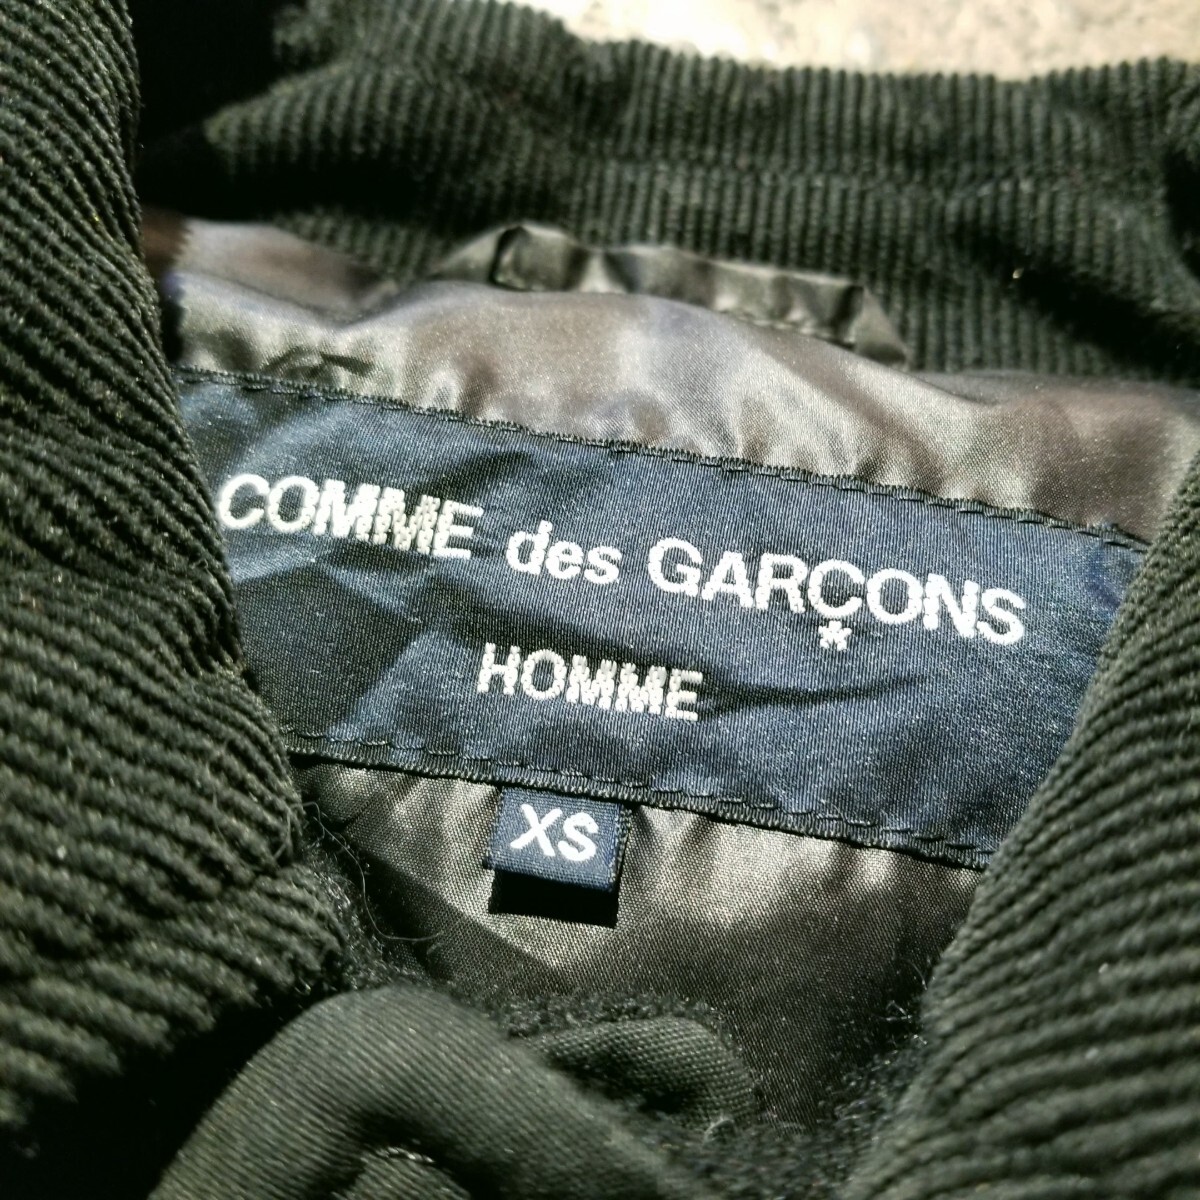 COMME des GARCONS HOMME 13AW ウール縮絨ダウンベスト 2013AW AD2013 コムデギャルソンオム_画像3